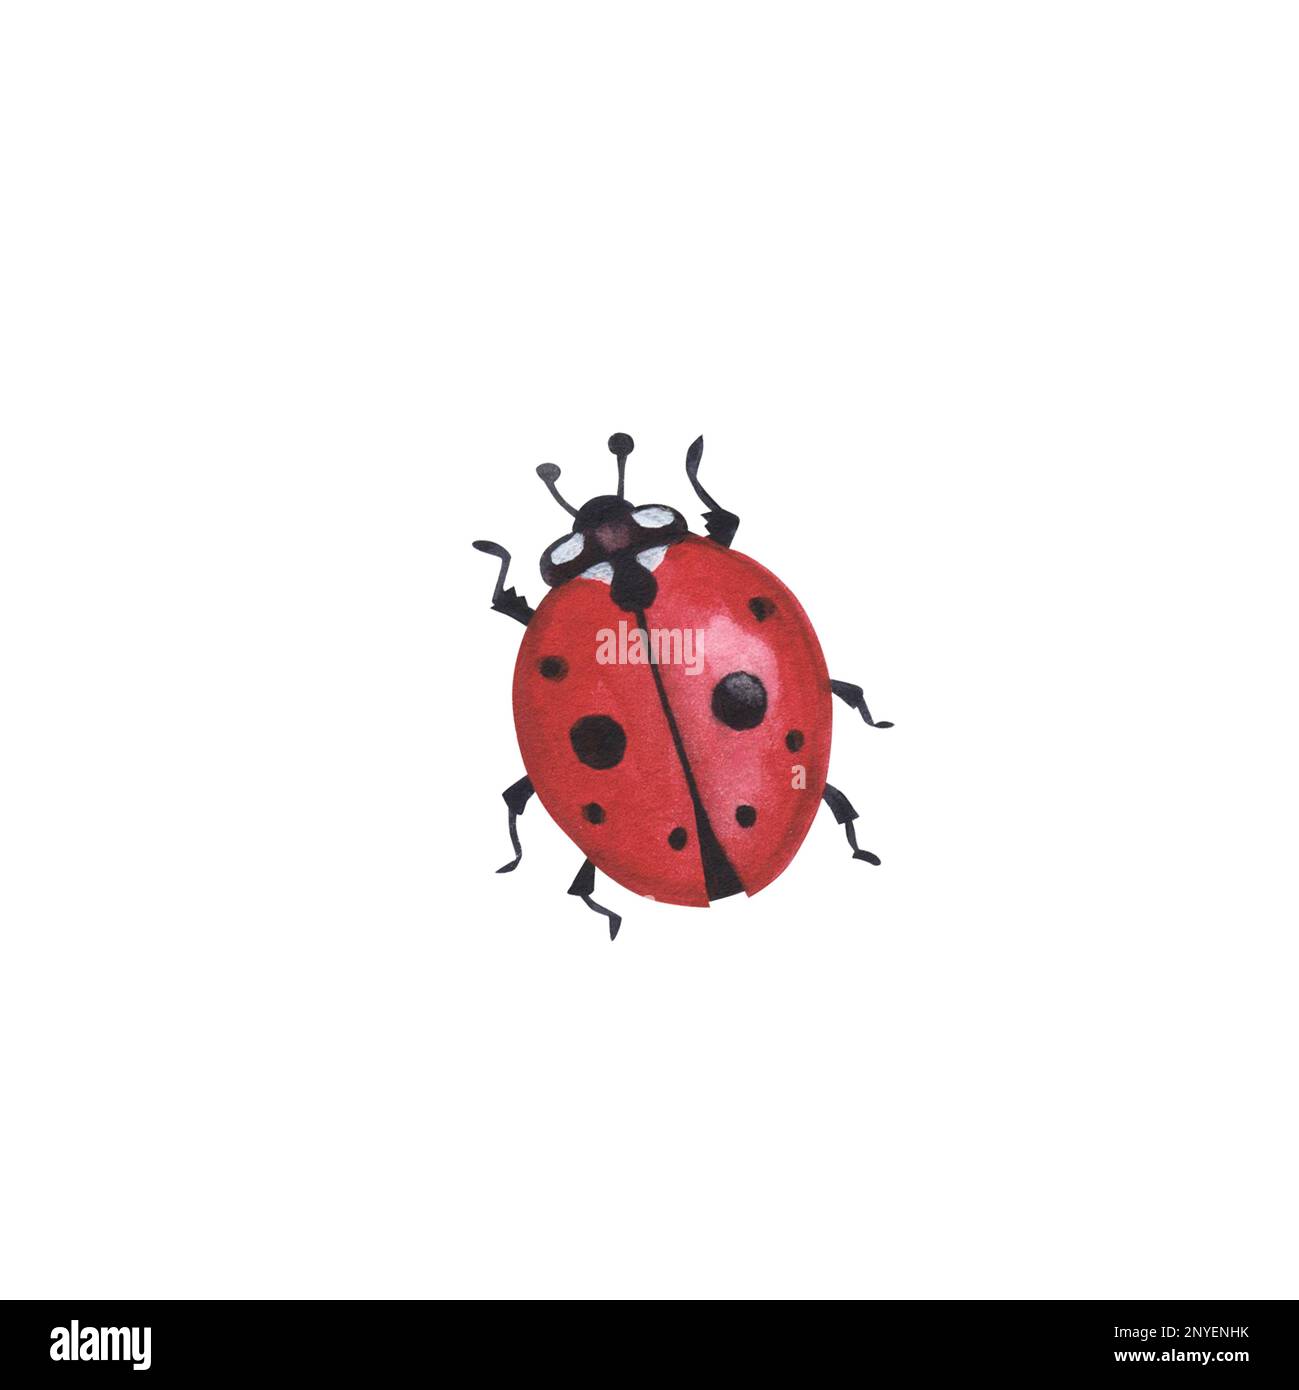 Realistic beetles insect isolated on white background. Watercolor hand drawn ladybug coleoptera llustration for design banner, poster. Stock Photo